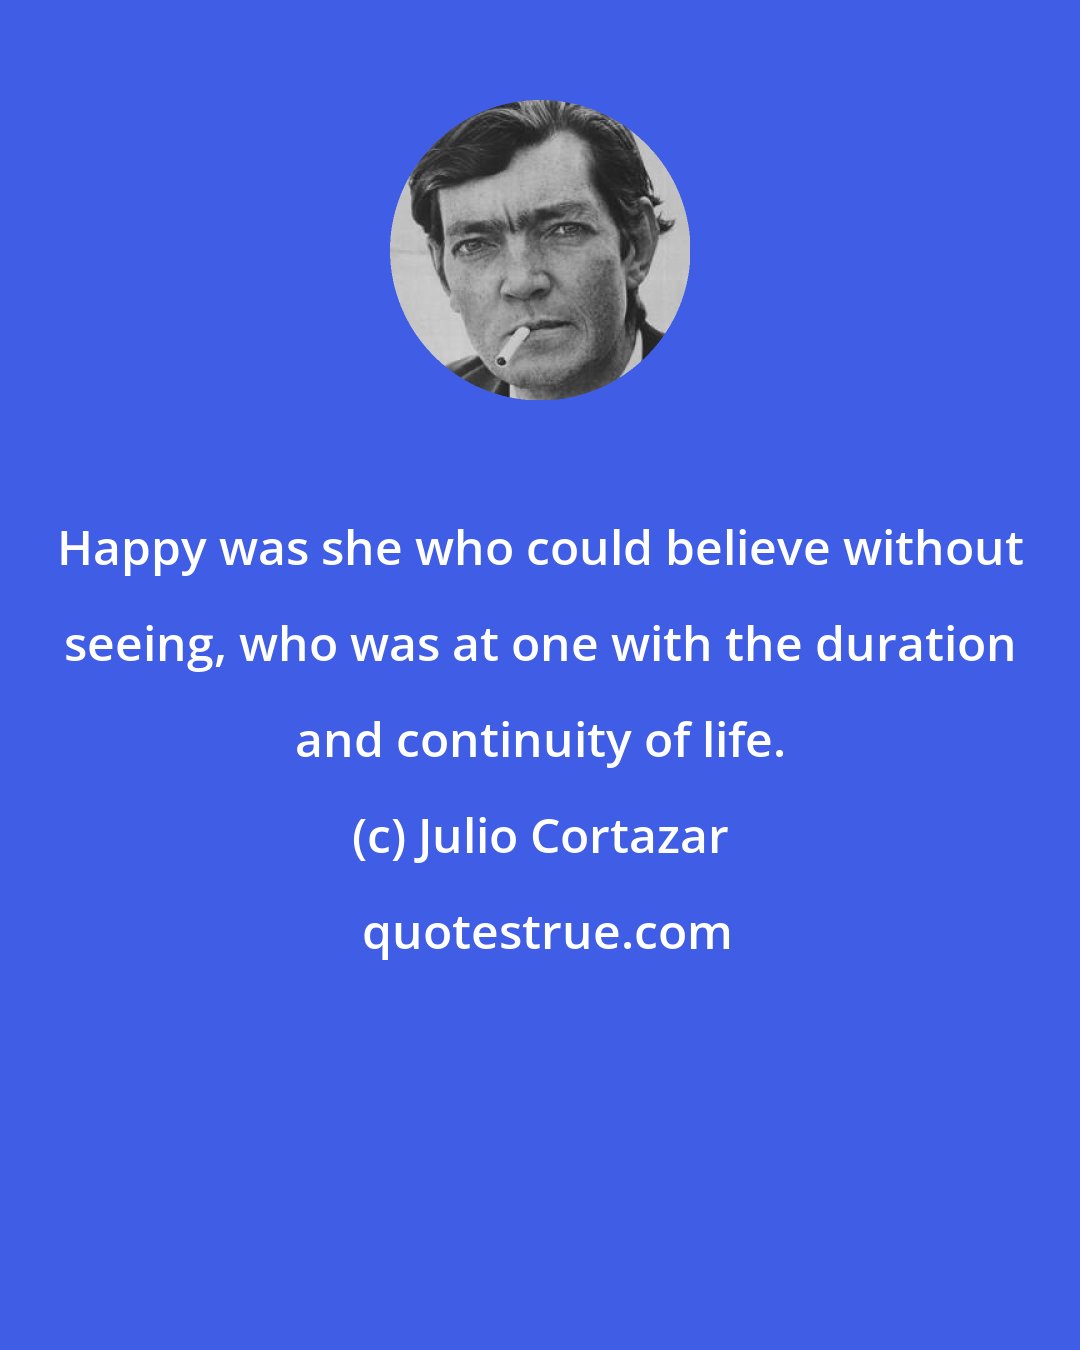 Julio Cortazar: Happy was she who could believe without seeing, who was at one with the duration and continuity of life.